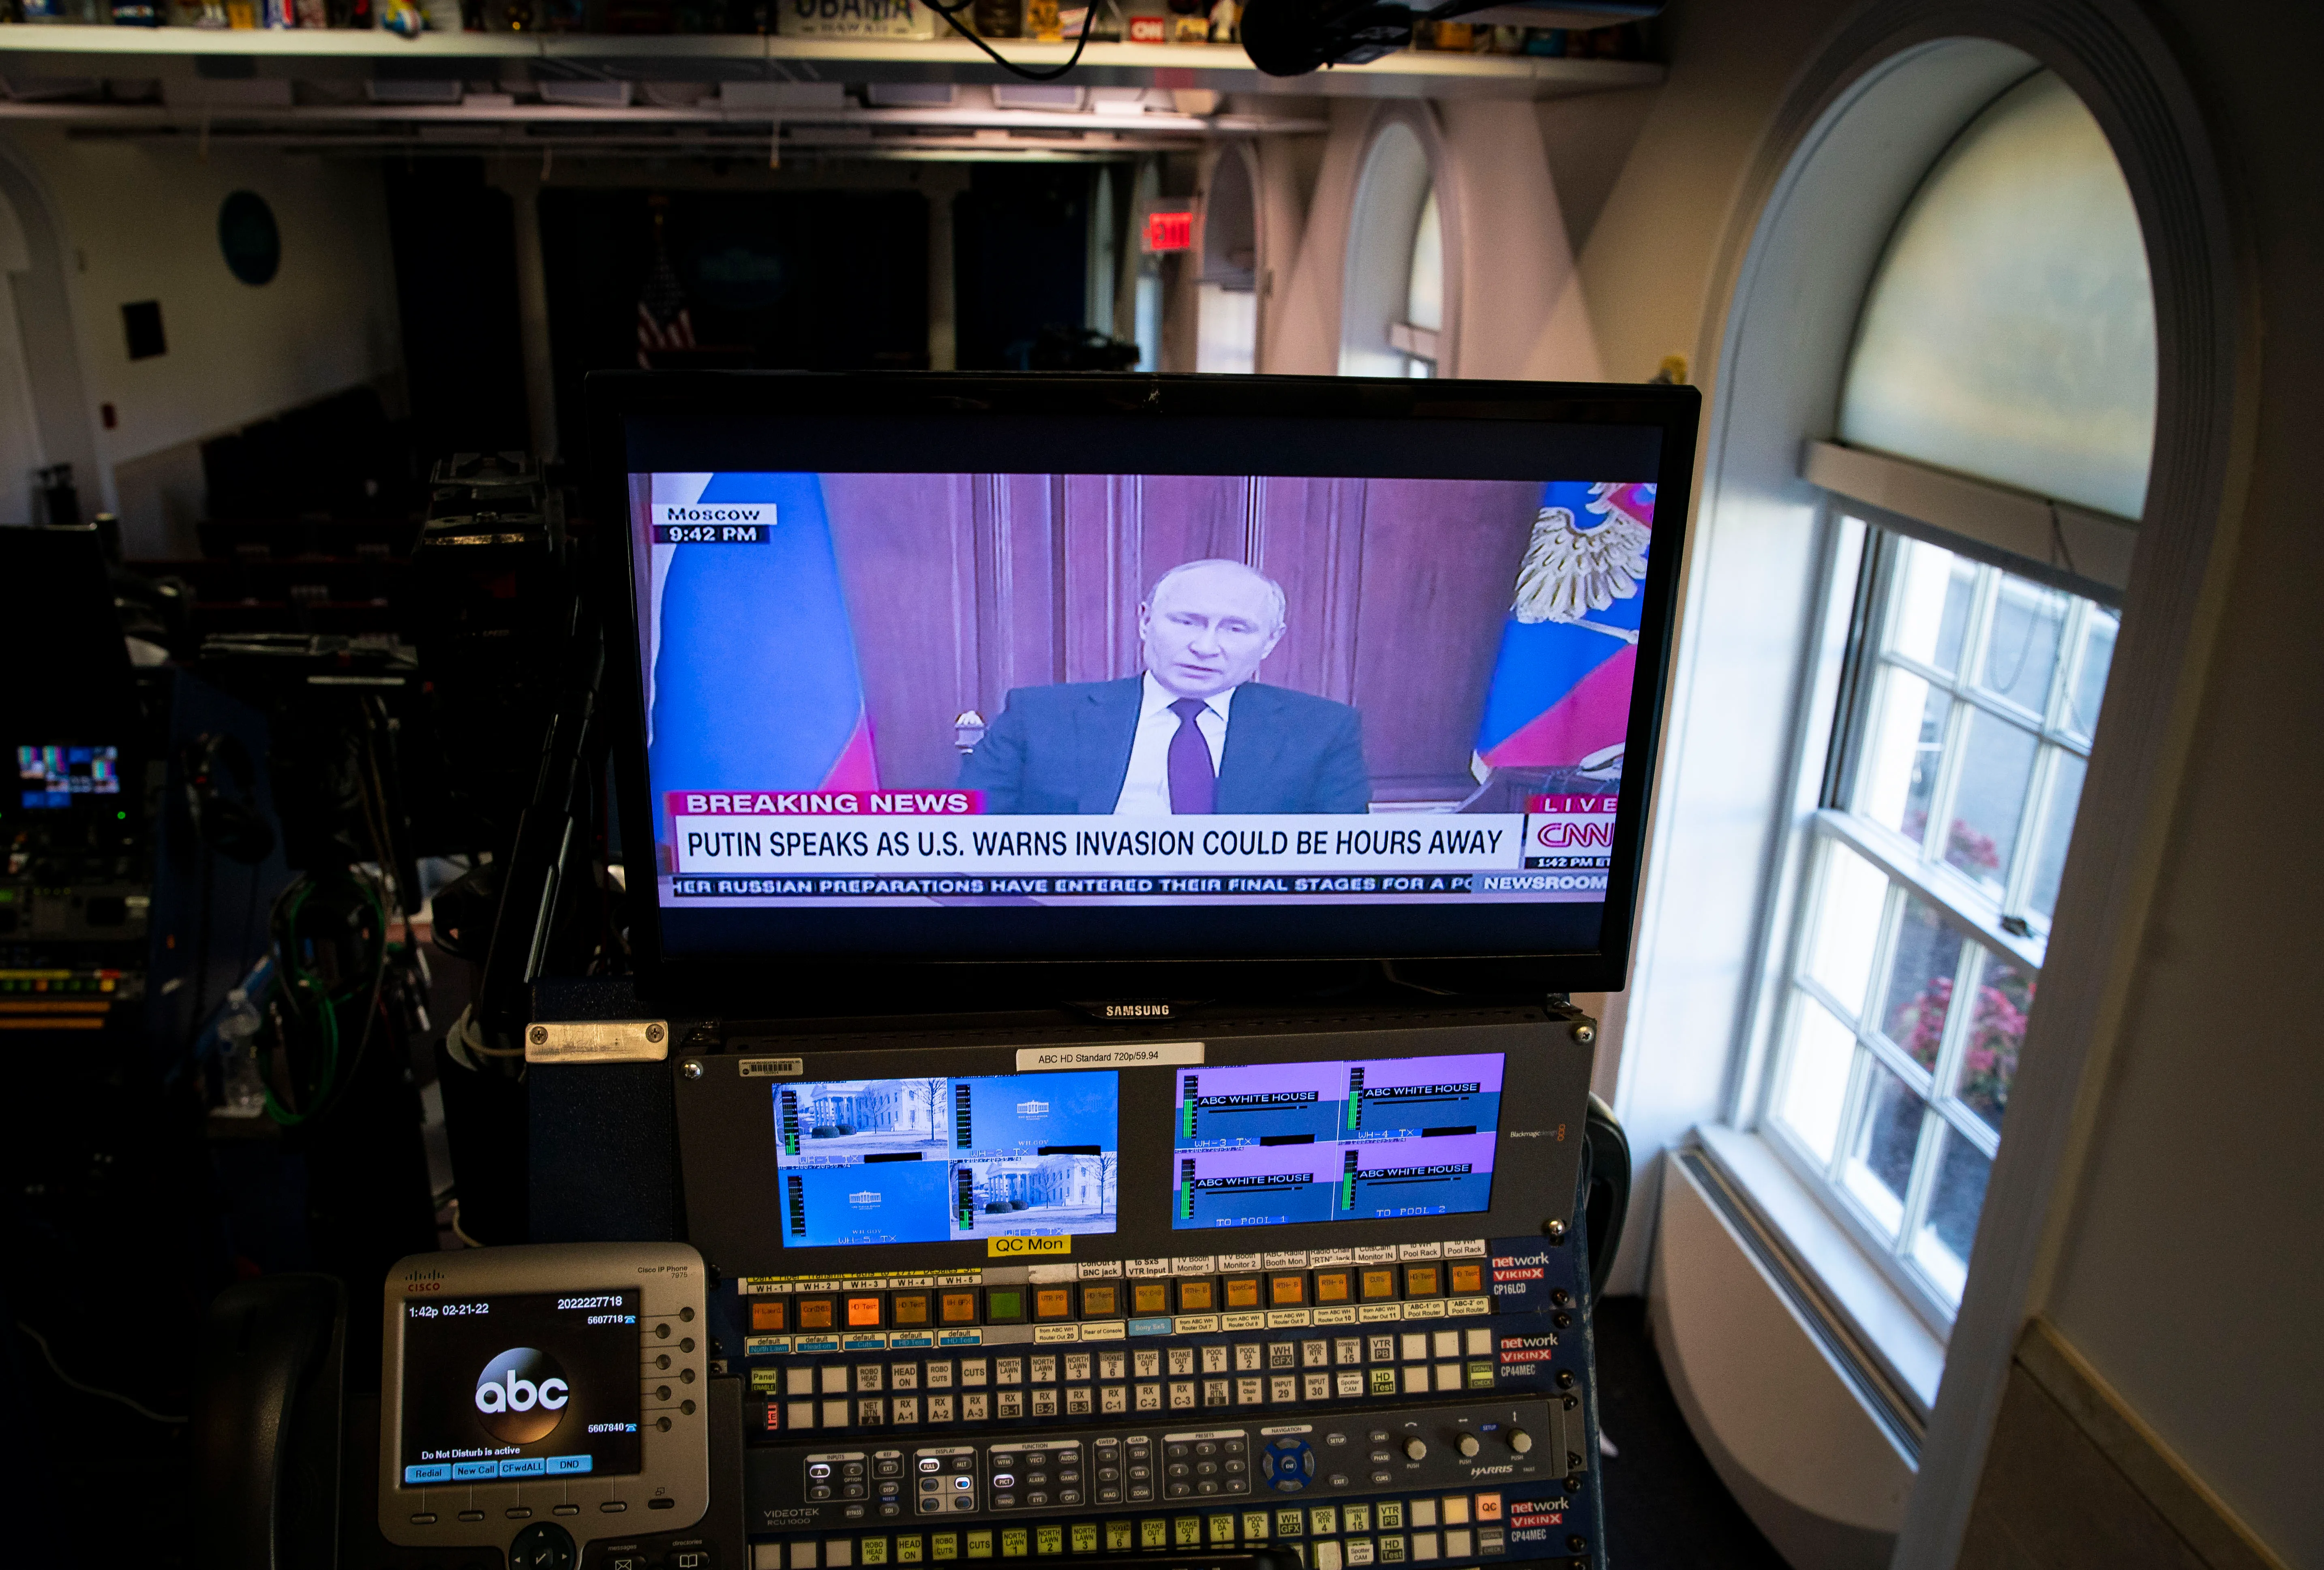 Vladimir Putin, Russia's president, speaks during a news conference, seen on a television monitor in the White House briefing room in Washington, U.S., on Monday, Feb. 21, 2022. Photographer: Al Drago/Pool/Sipa USANo Use Germany.